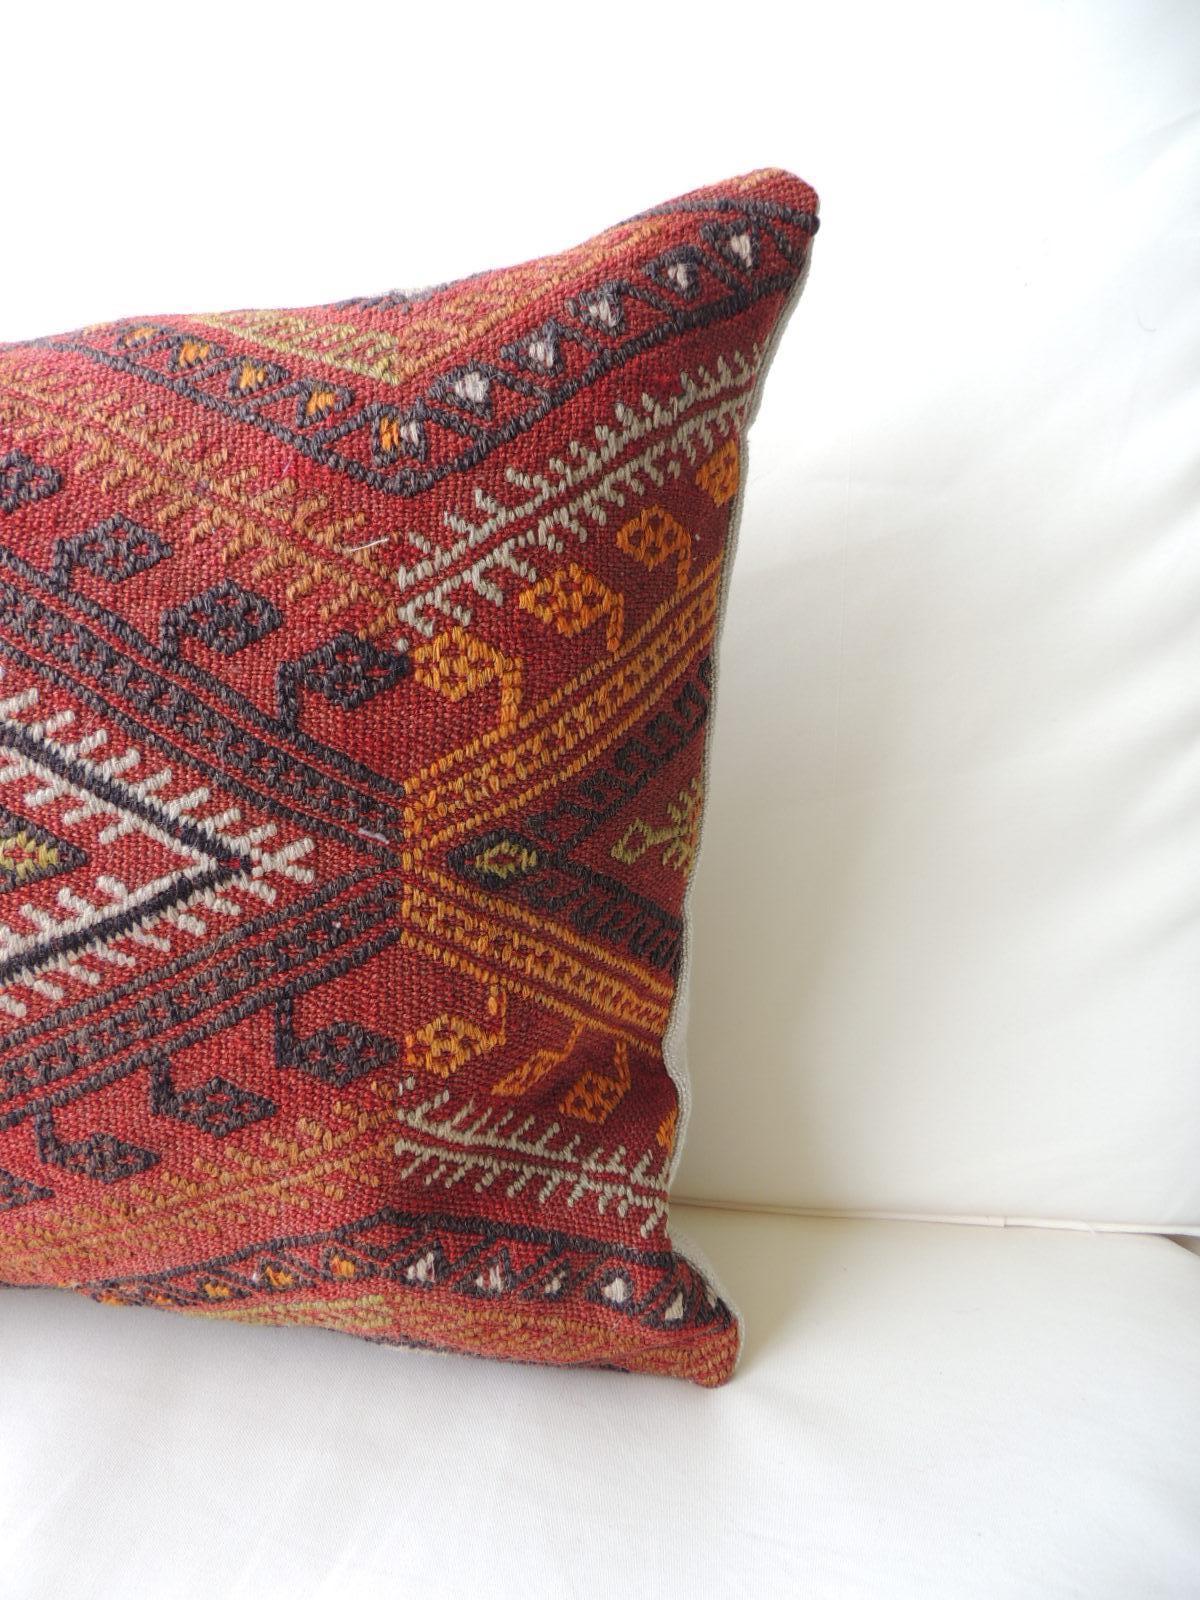 Vintage red and orange woven Kilim bolster decorative pillow
with natural linen backing.
Decorative pillow handcrafted and designed in the USA. Closure by stitch (no zipper closure) with custom made pillow insert.
In shades of red, grey, black,